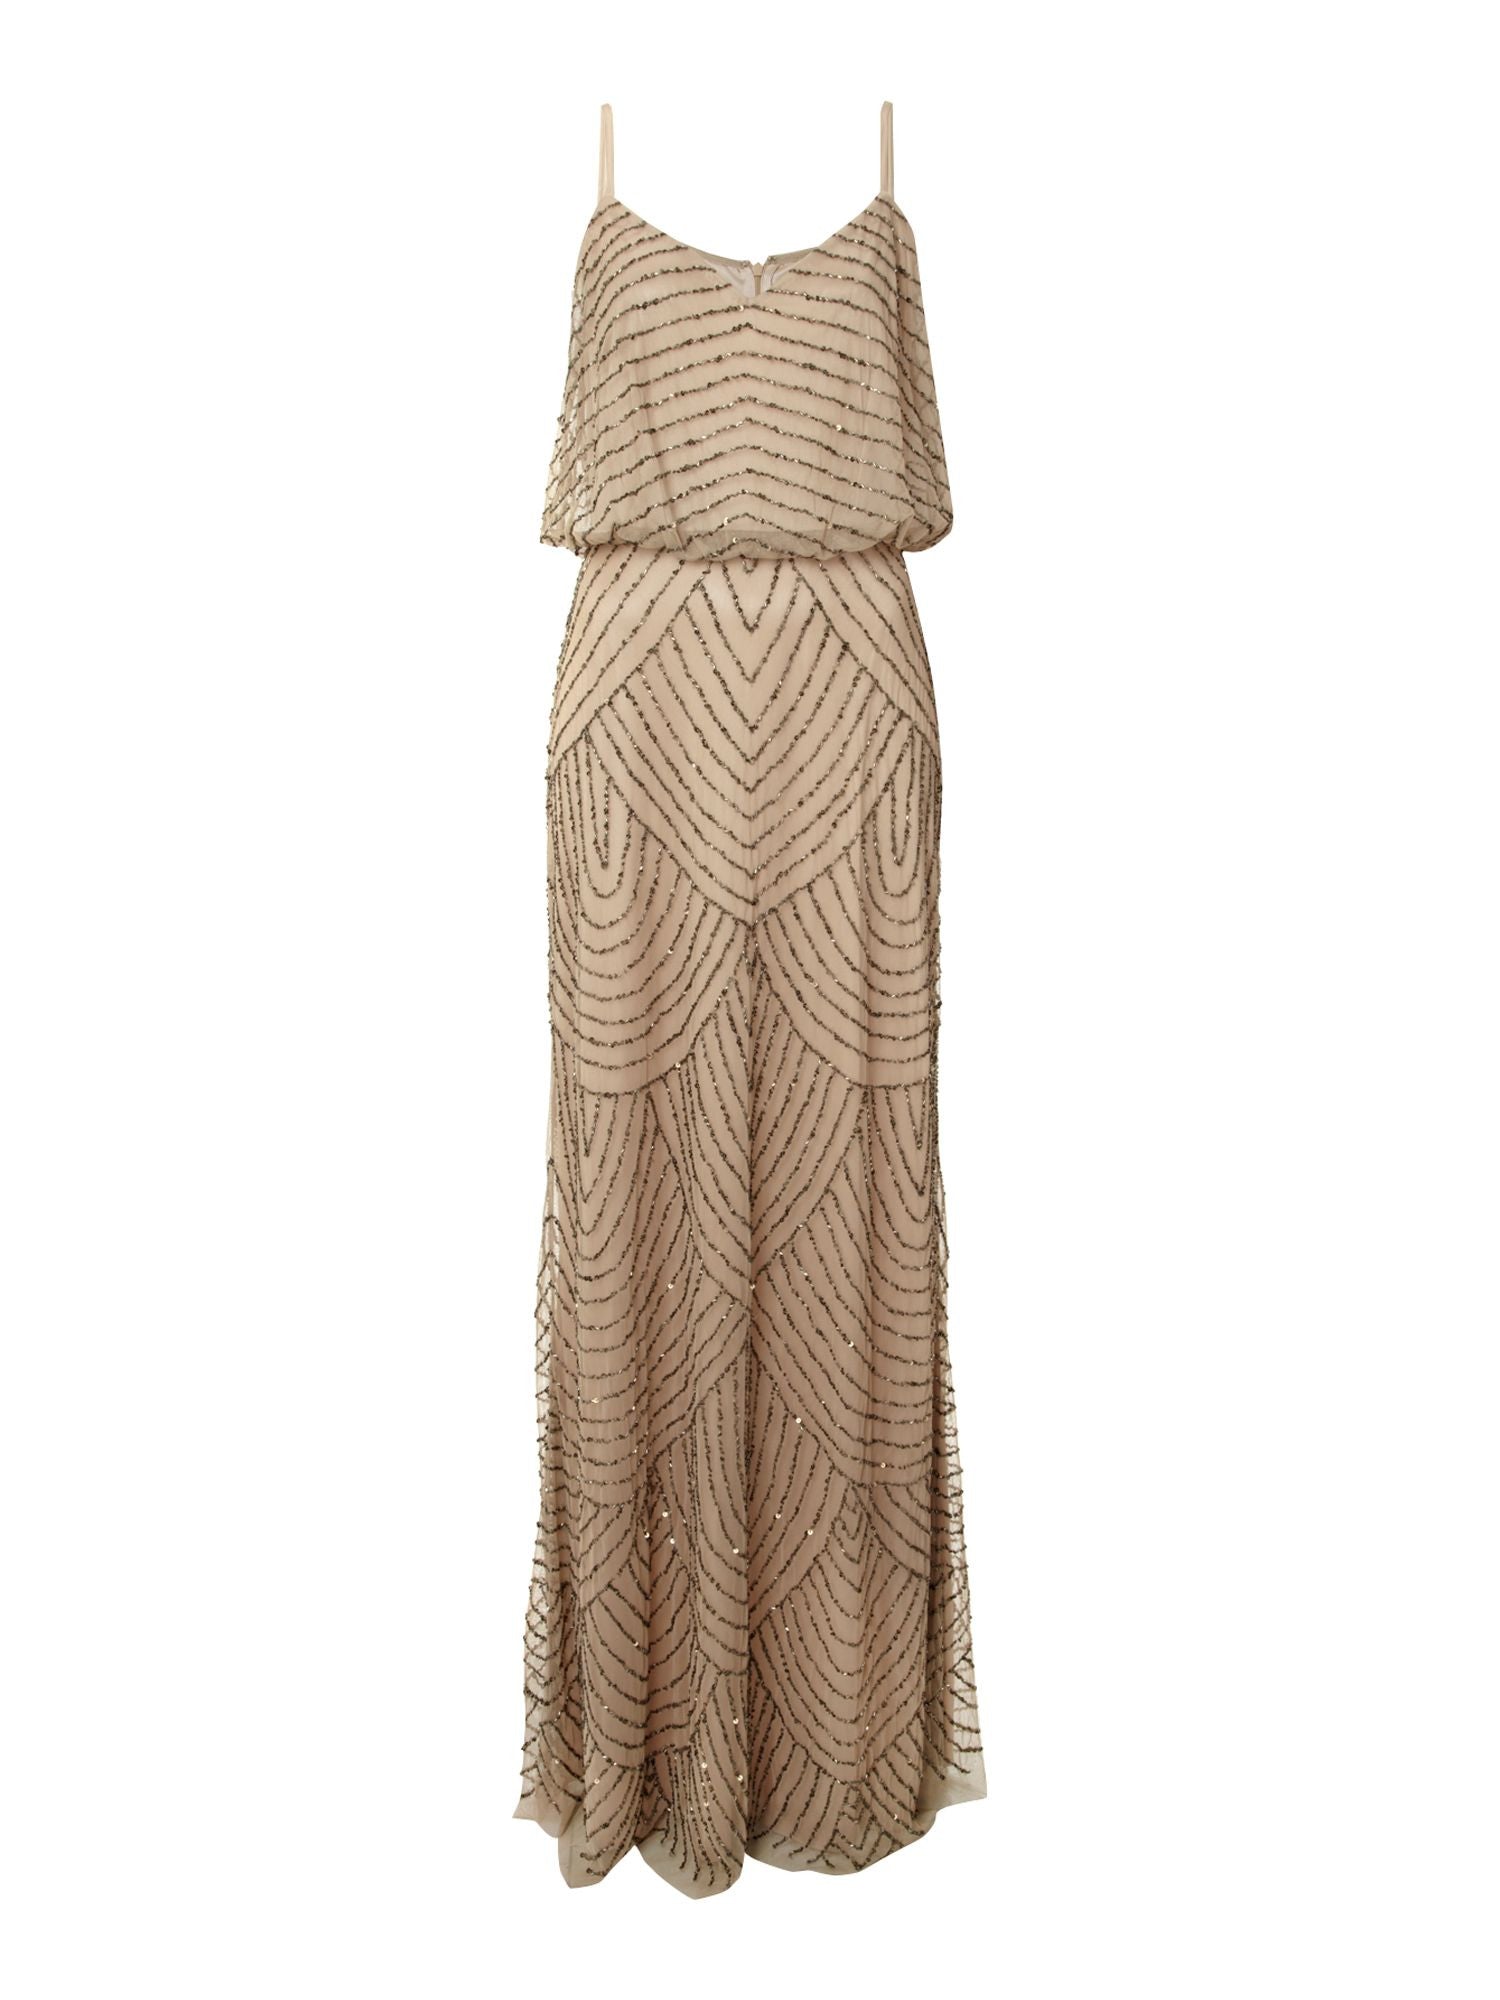 Adrianna Papell Art Deco Beaded Blouson Gown - Taupe Pink